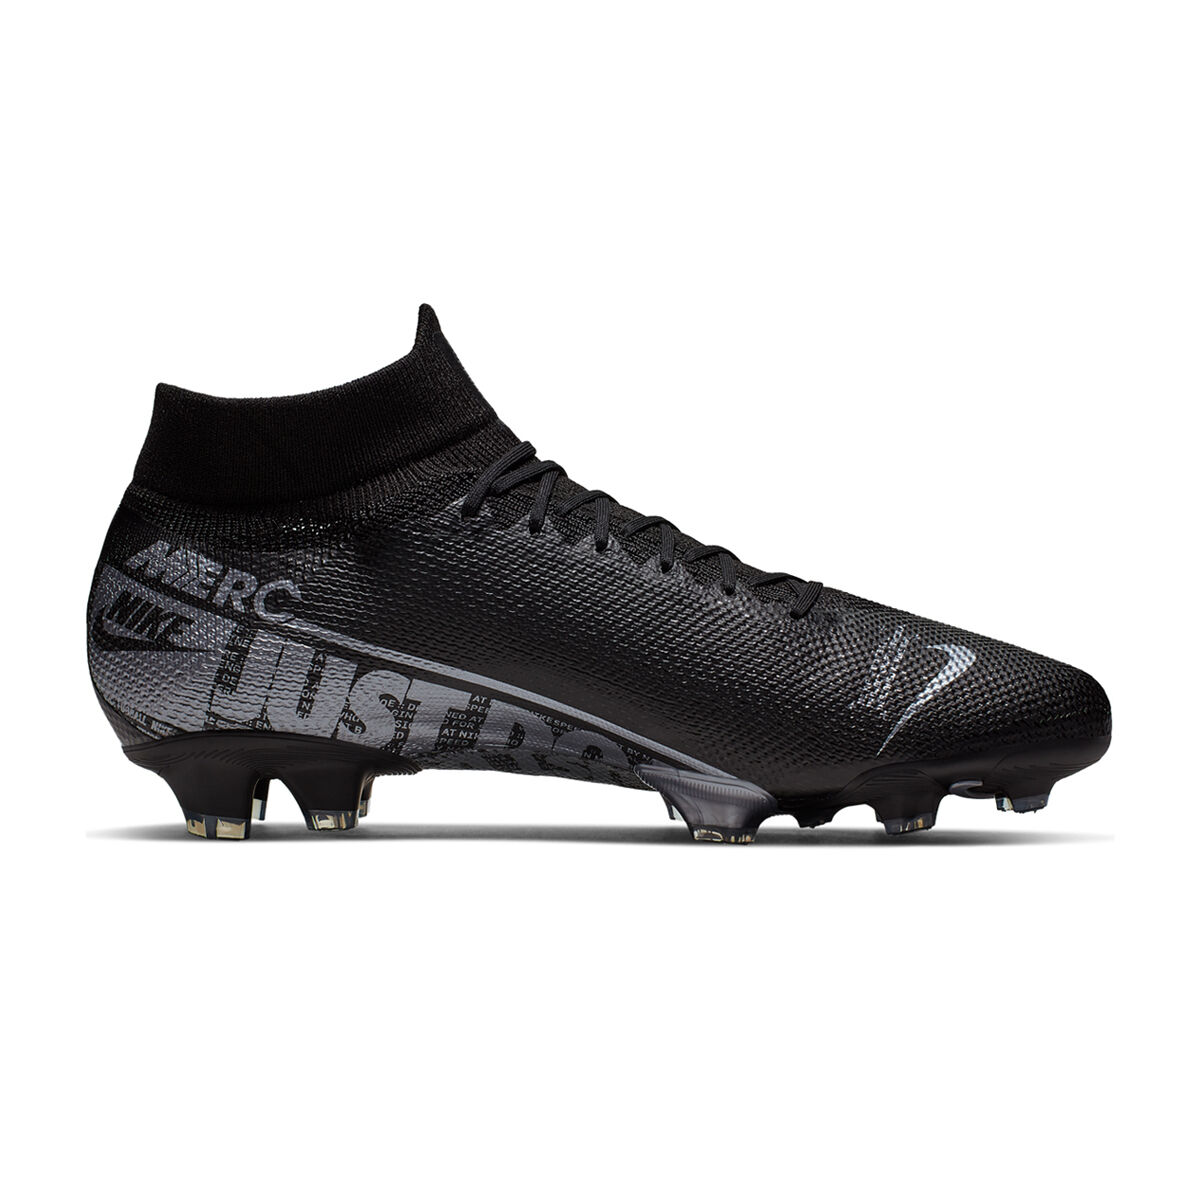 Nike Mercurial Superfly 7 Pro Firm Ground Soccer Cleat Review